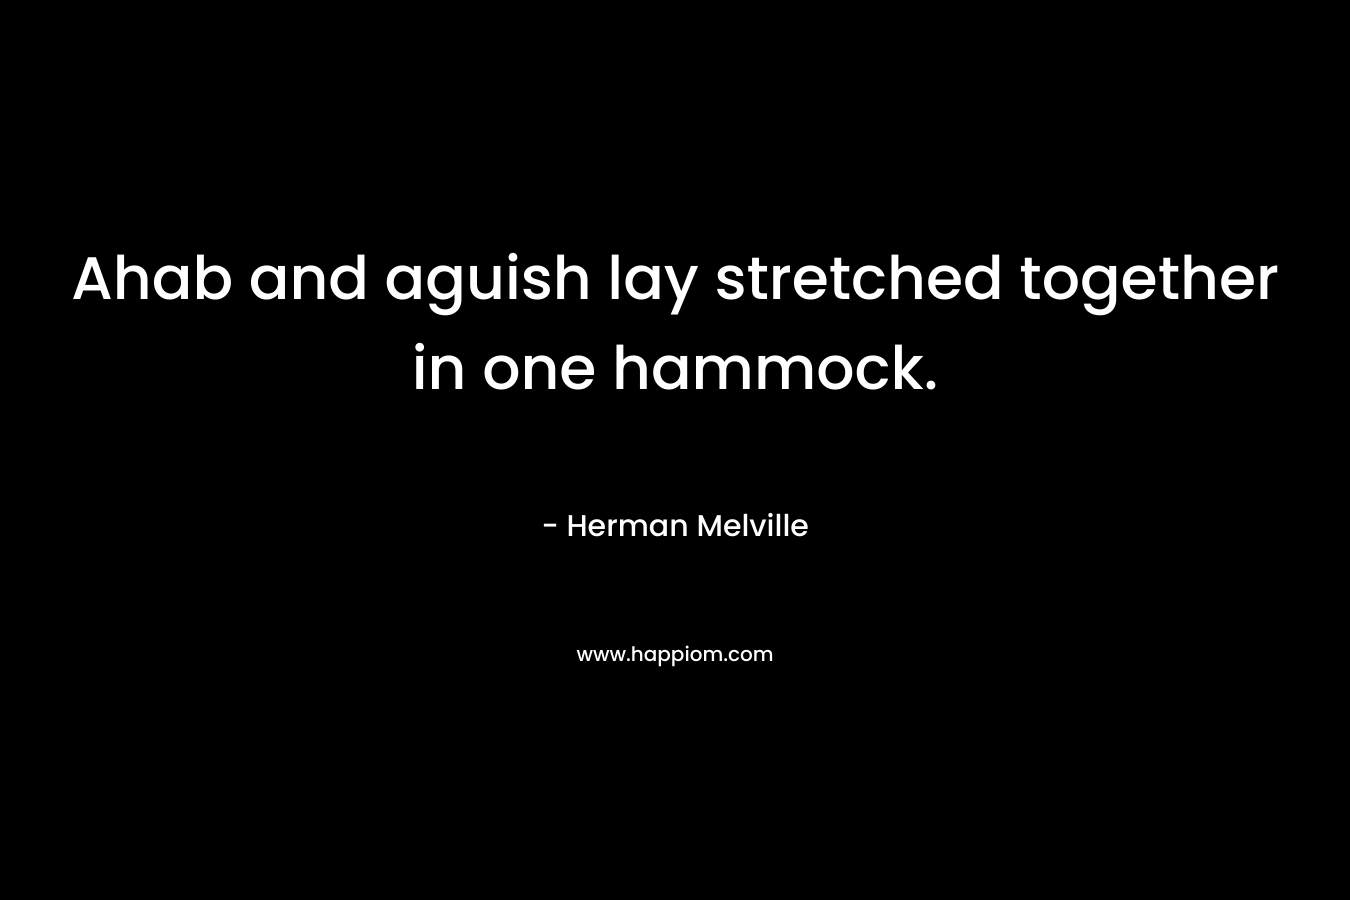 Ahab and aguish lay stretched together in one hammock. – Herman Melville